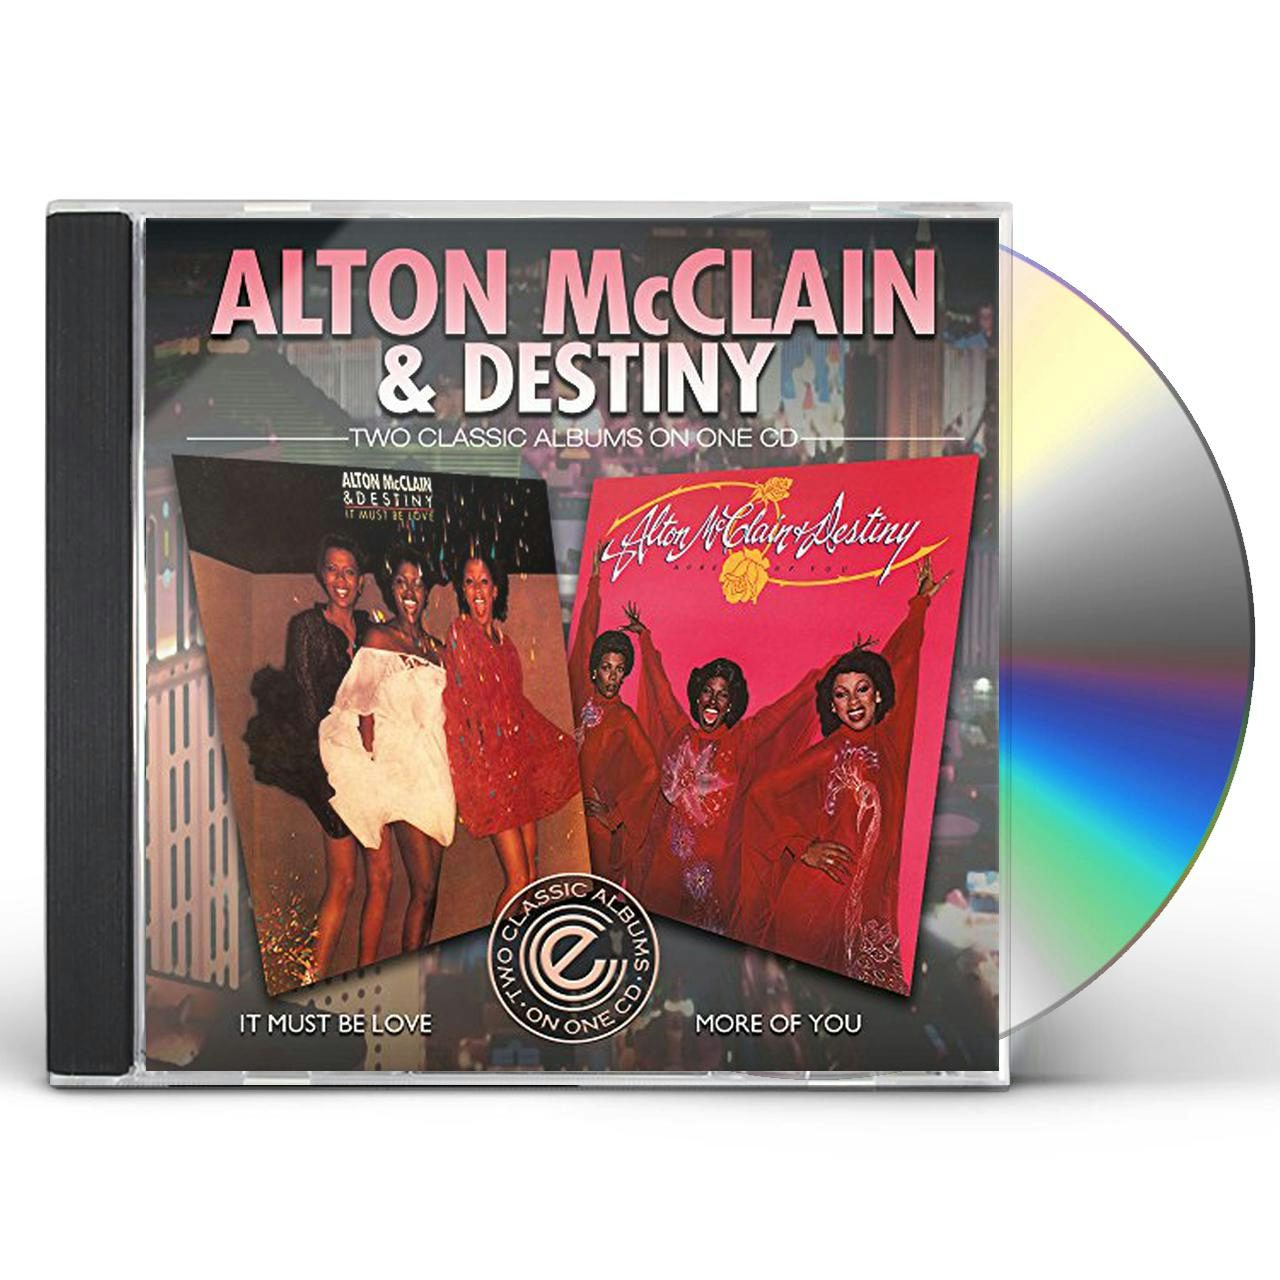 Alton McClain & Destiny IT MUST BE LOVE / MORE OF YOU CD